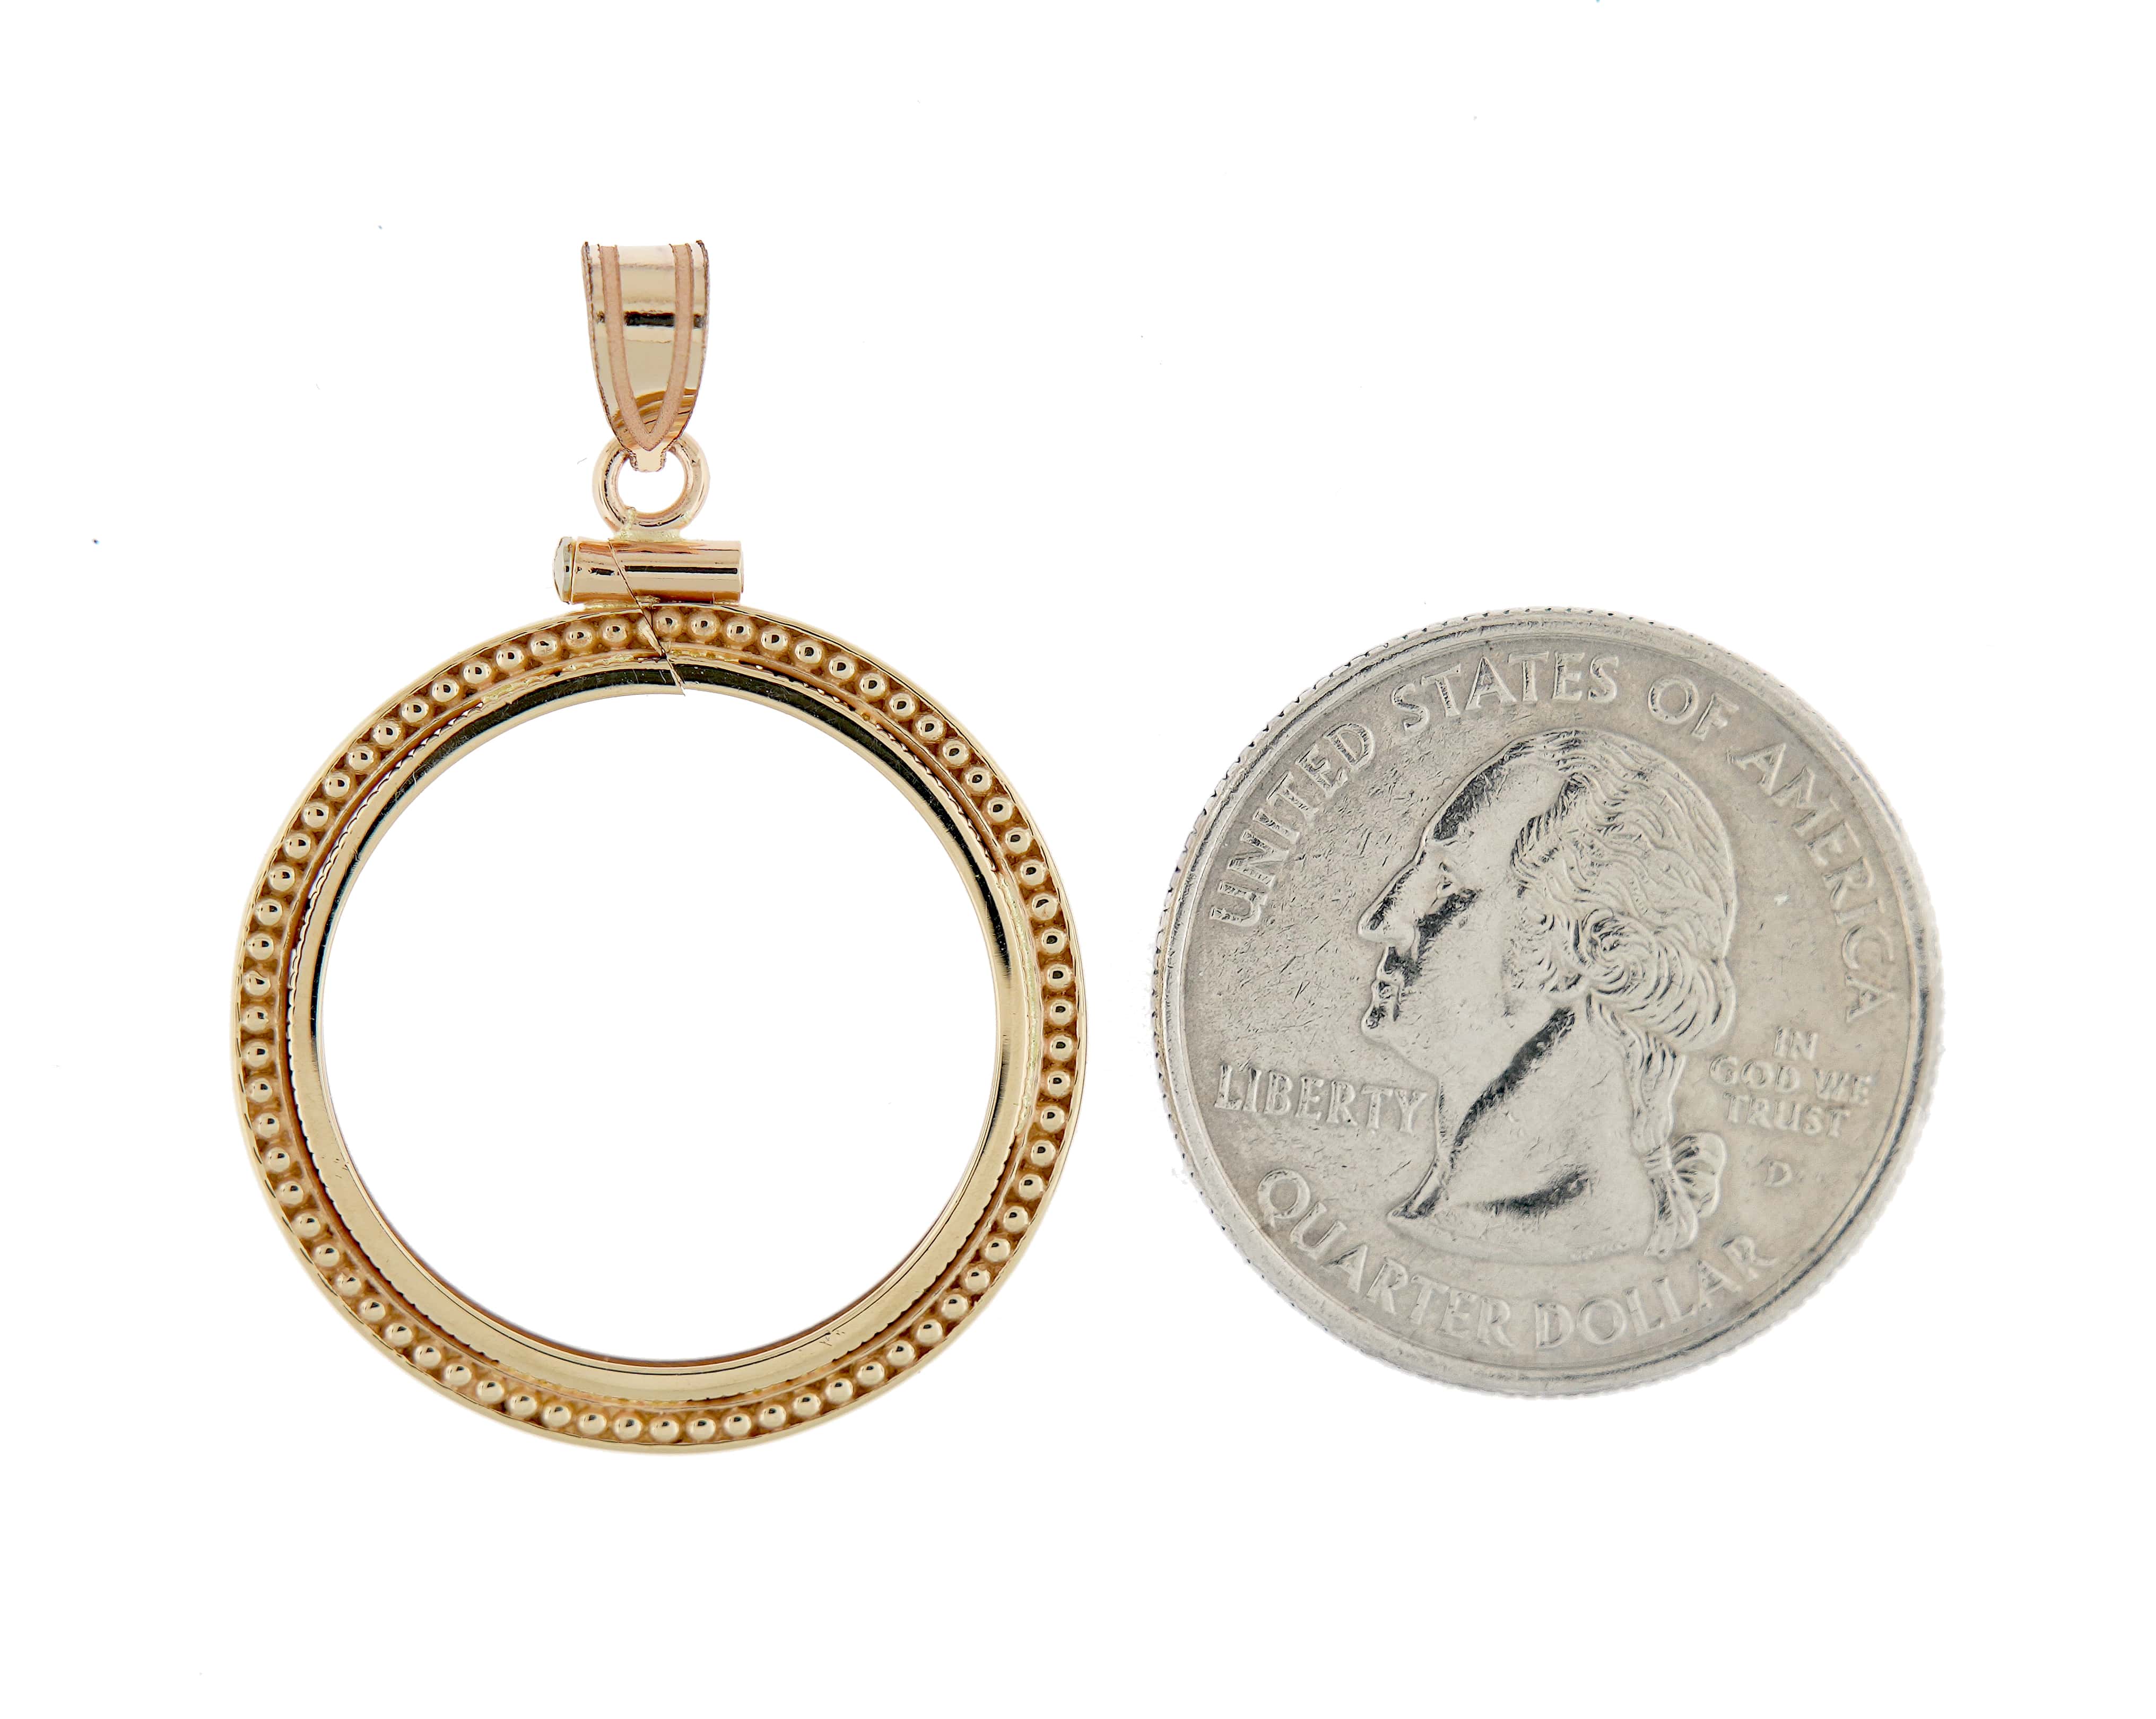 14K Yellow Gold Coin Holder for 22mm Coins or 1/4 oz American Eagle US $5 Dollar Jamestown 1/4 oz Panda 2 Rand Screw Top Bezel Beaded Pendant Charm